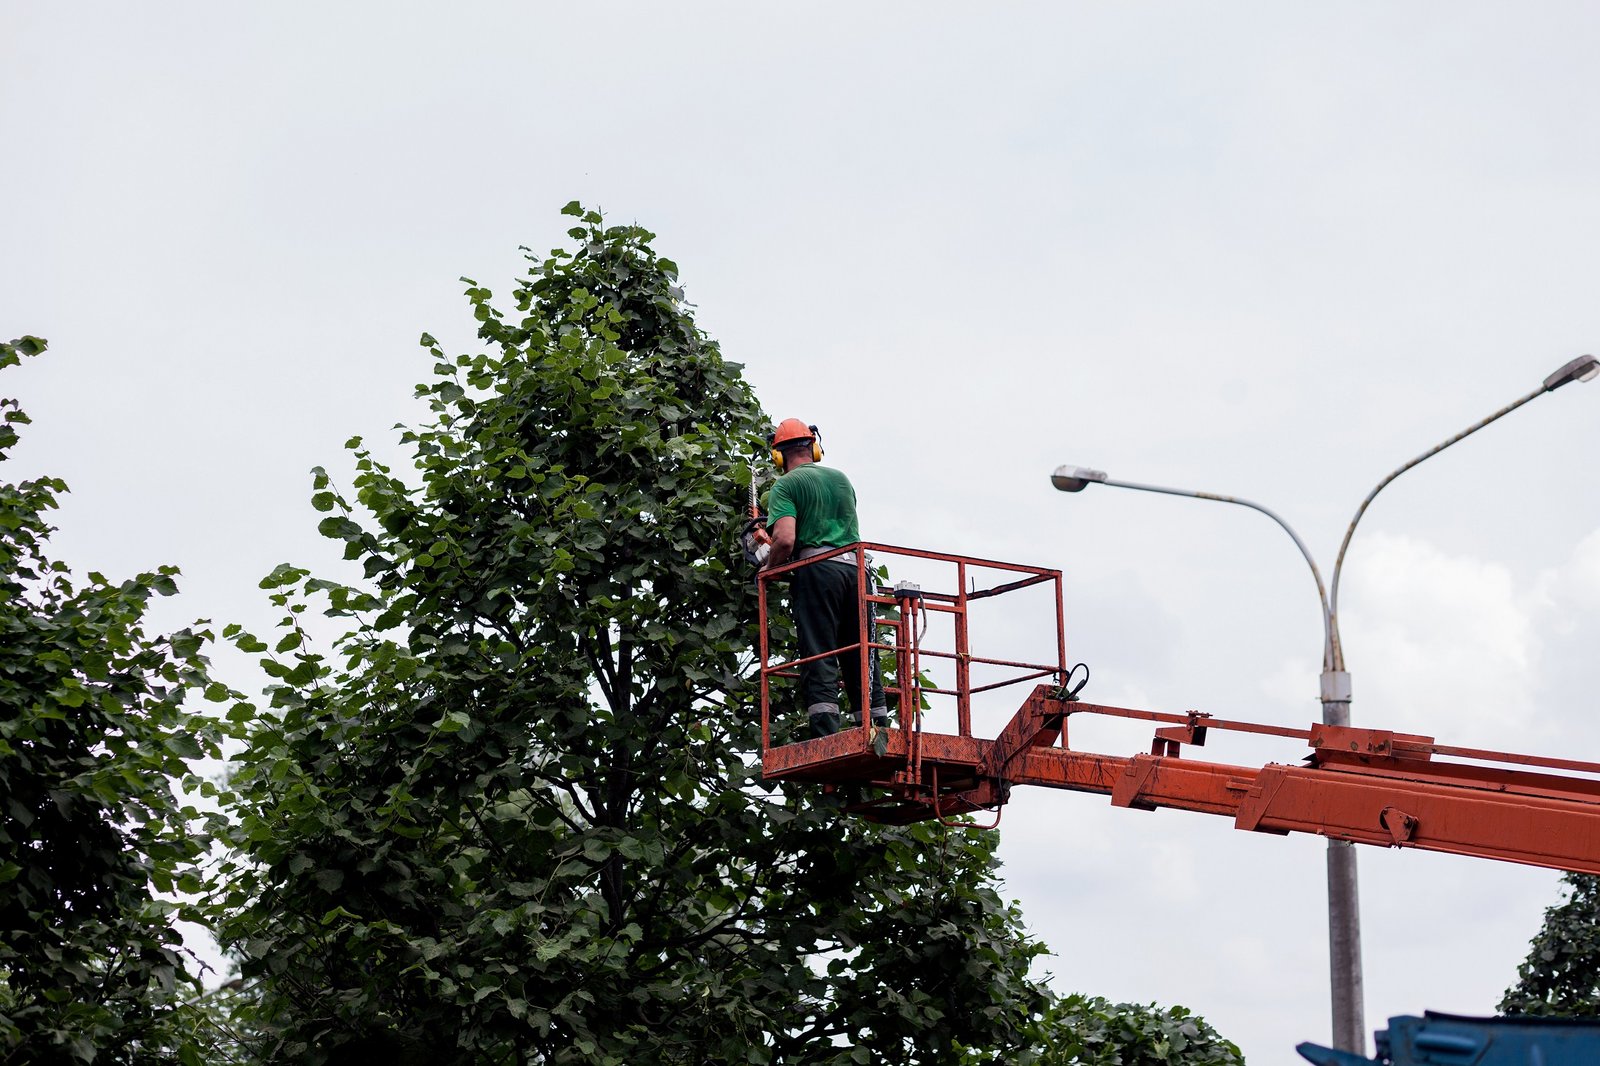 Tree Removal Services Can Provide You With the Professional Help You Need